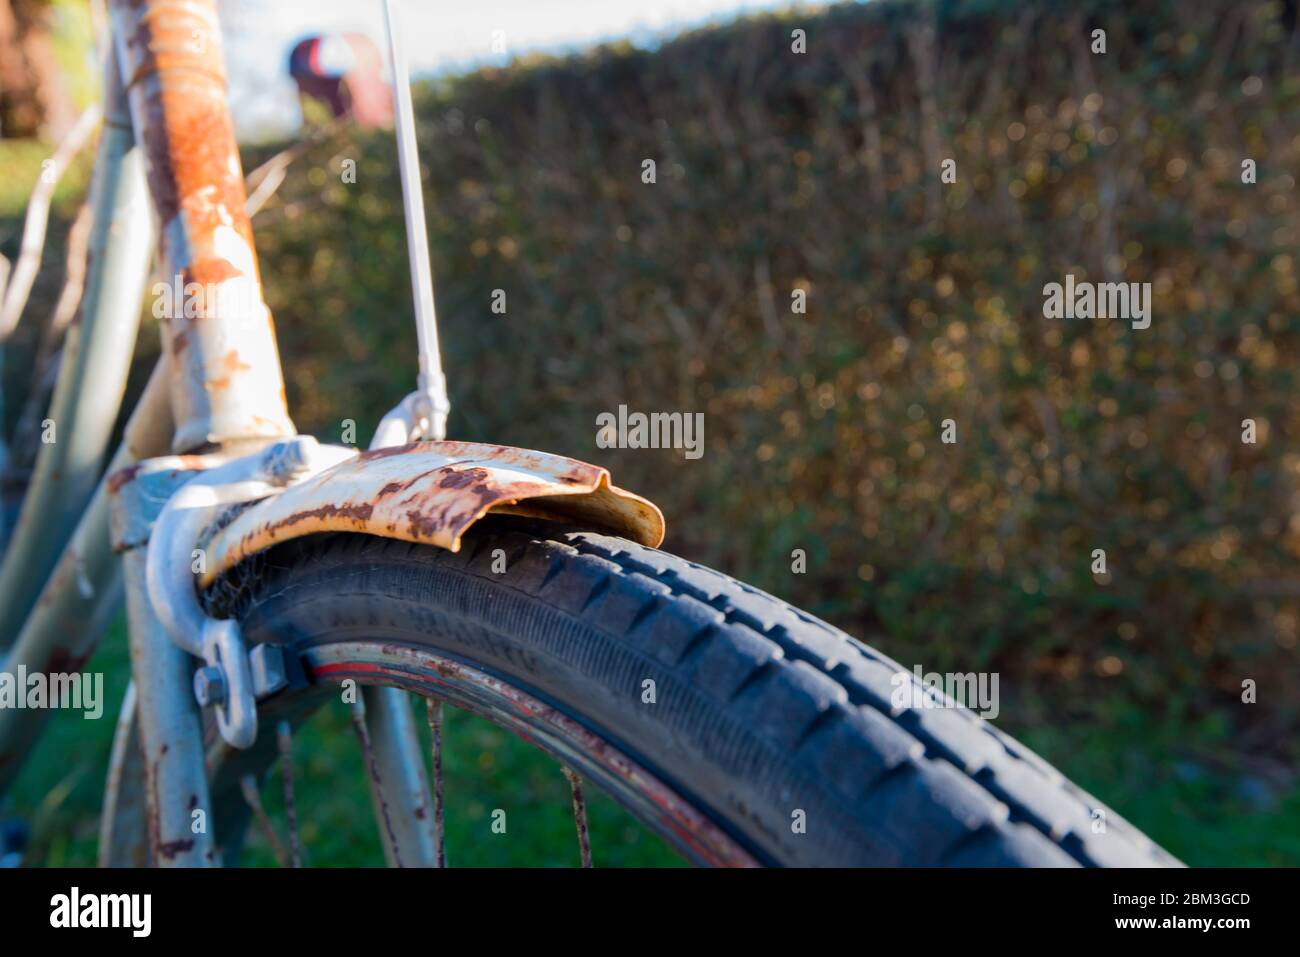 A front on close up image of an old rusting bicycle front wheel, brake pads, mudguard and goose-neck in afternoon sun Stock Photo